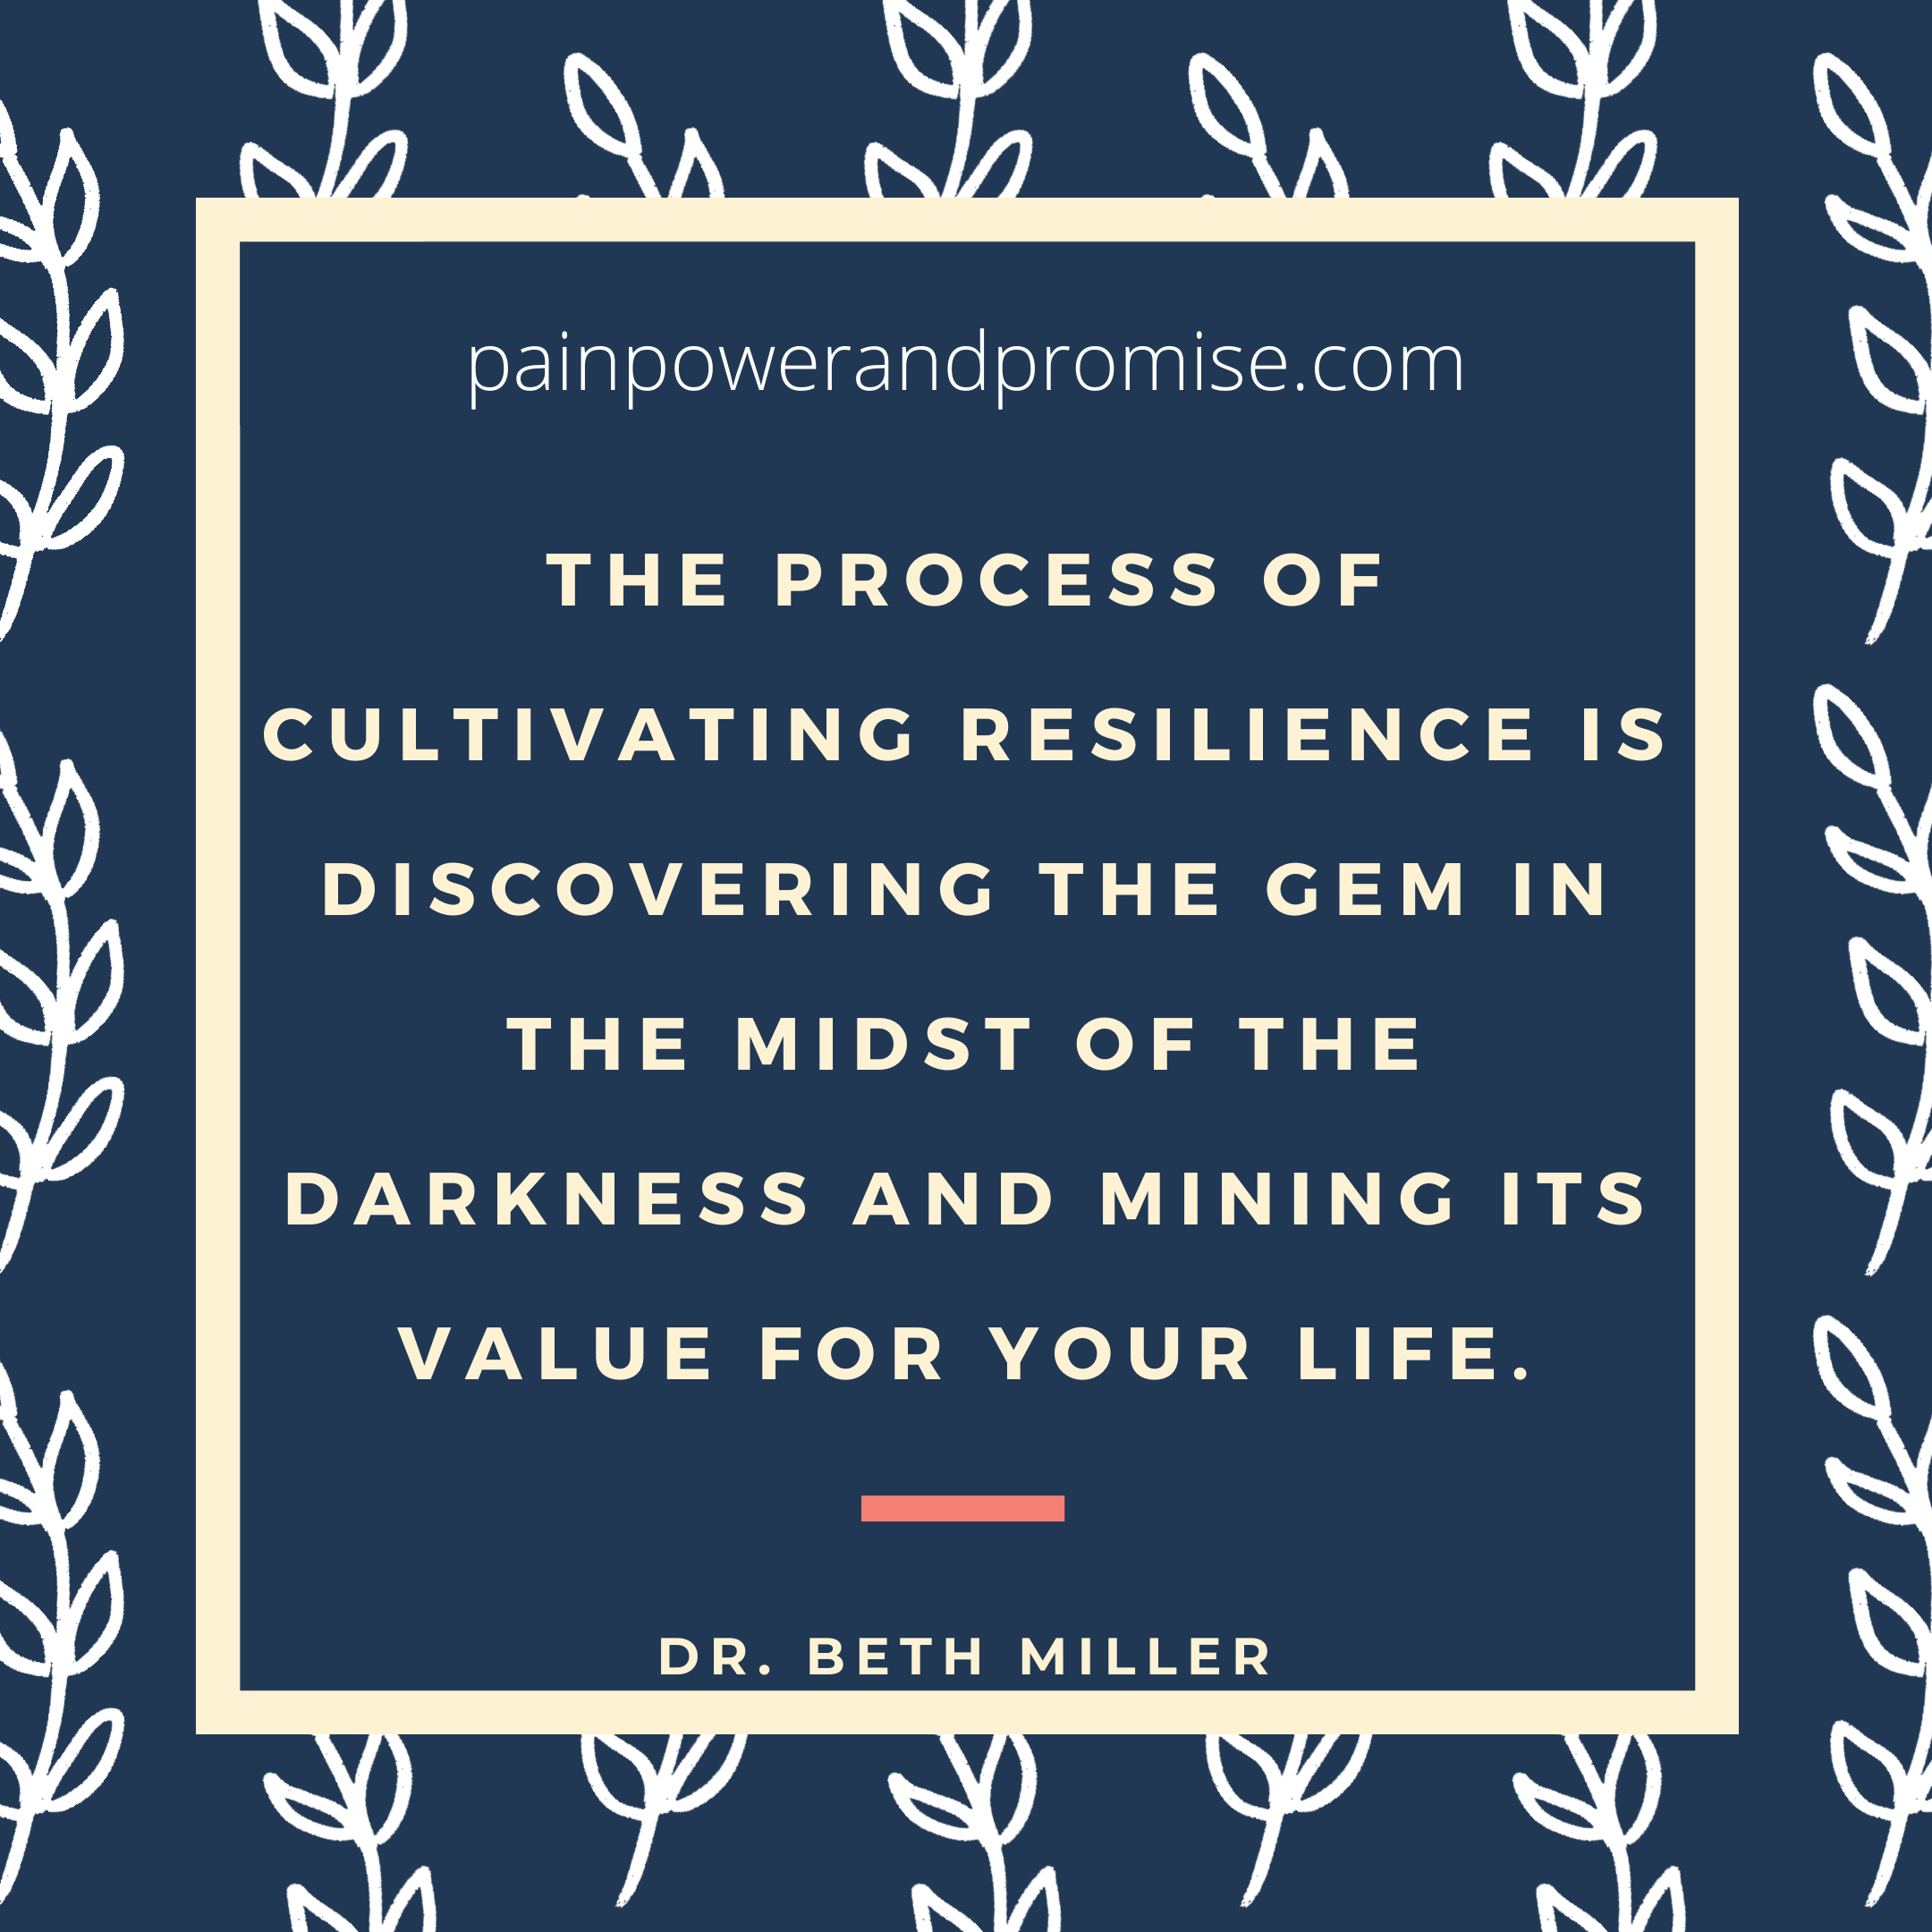 The process of cultivating resilience is discovering the gem in the midst of the darkness and mining its value for your life.